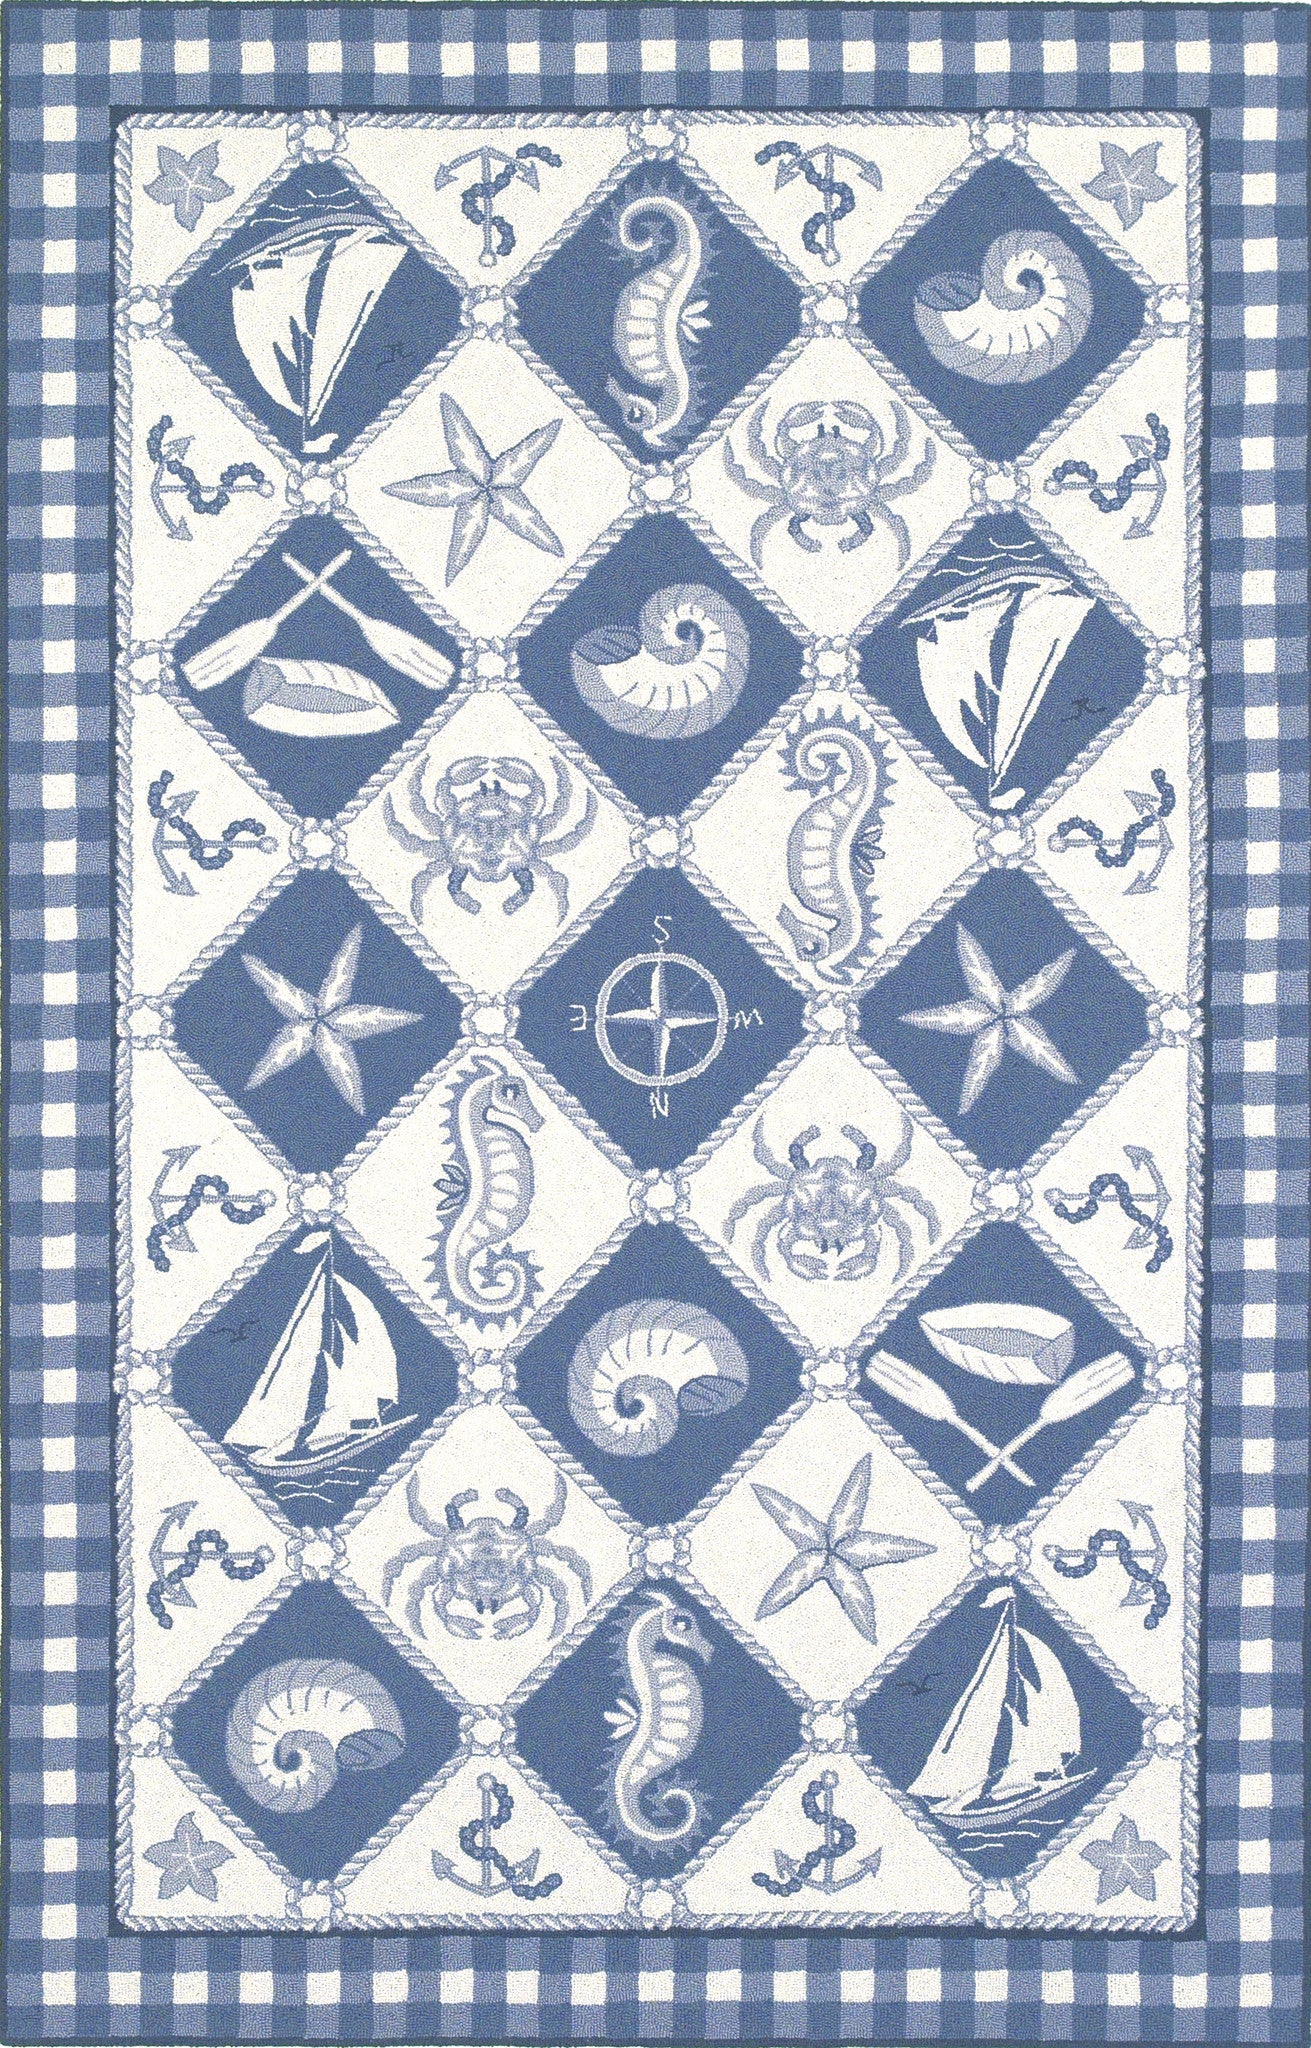 KAS Colonial 1807 Blue/Ivory Nautical Panel Hand Hooked Area Rug